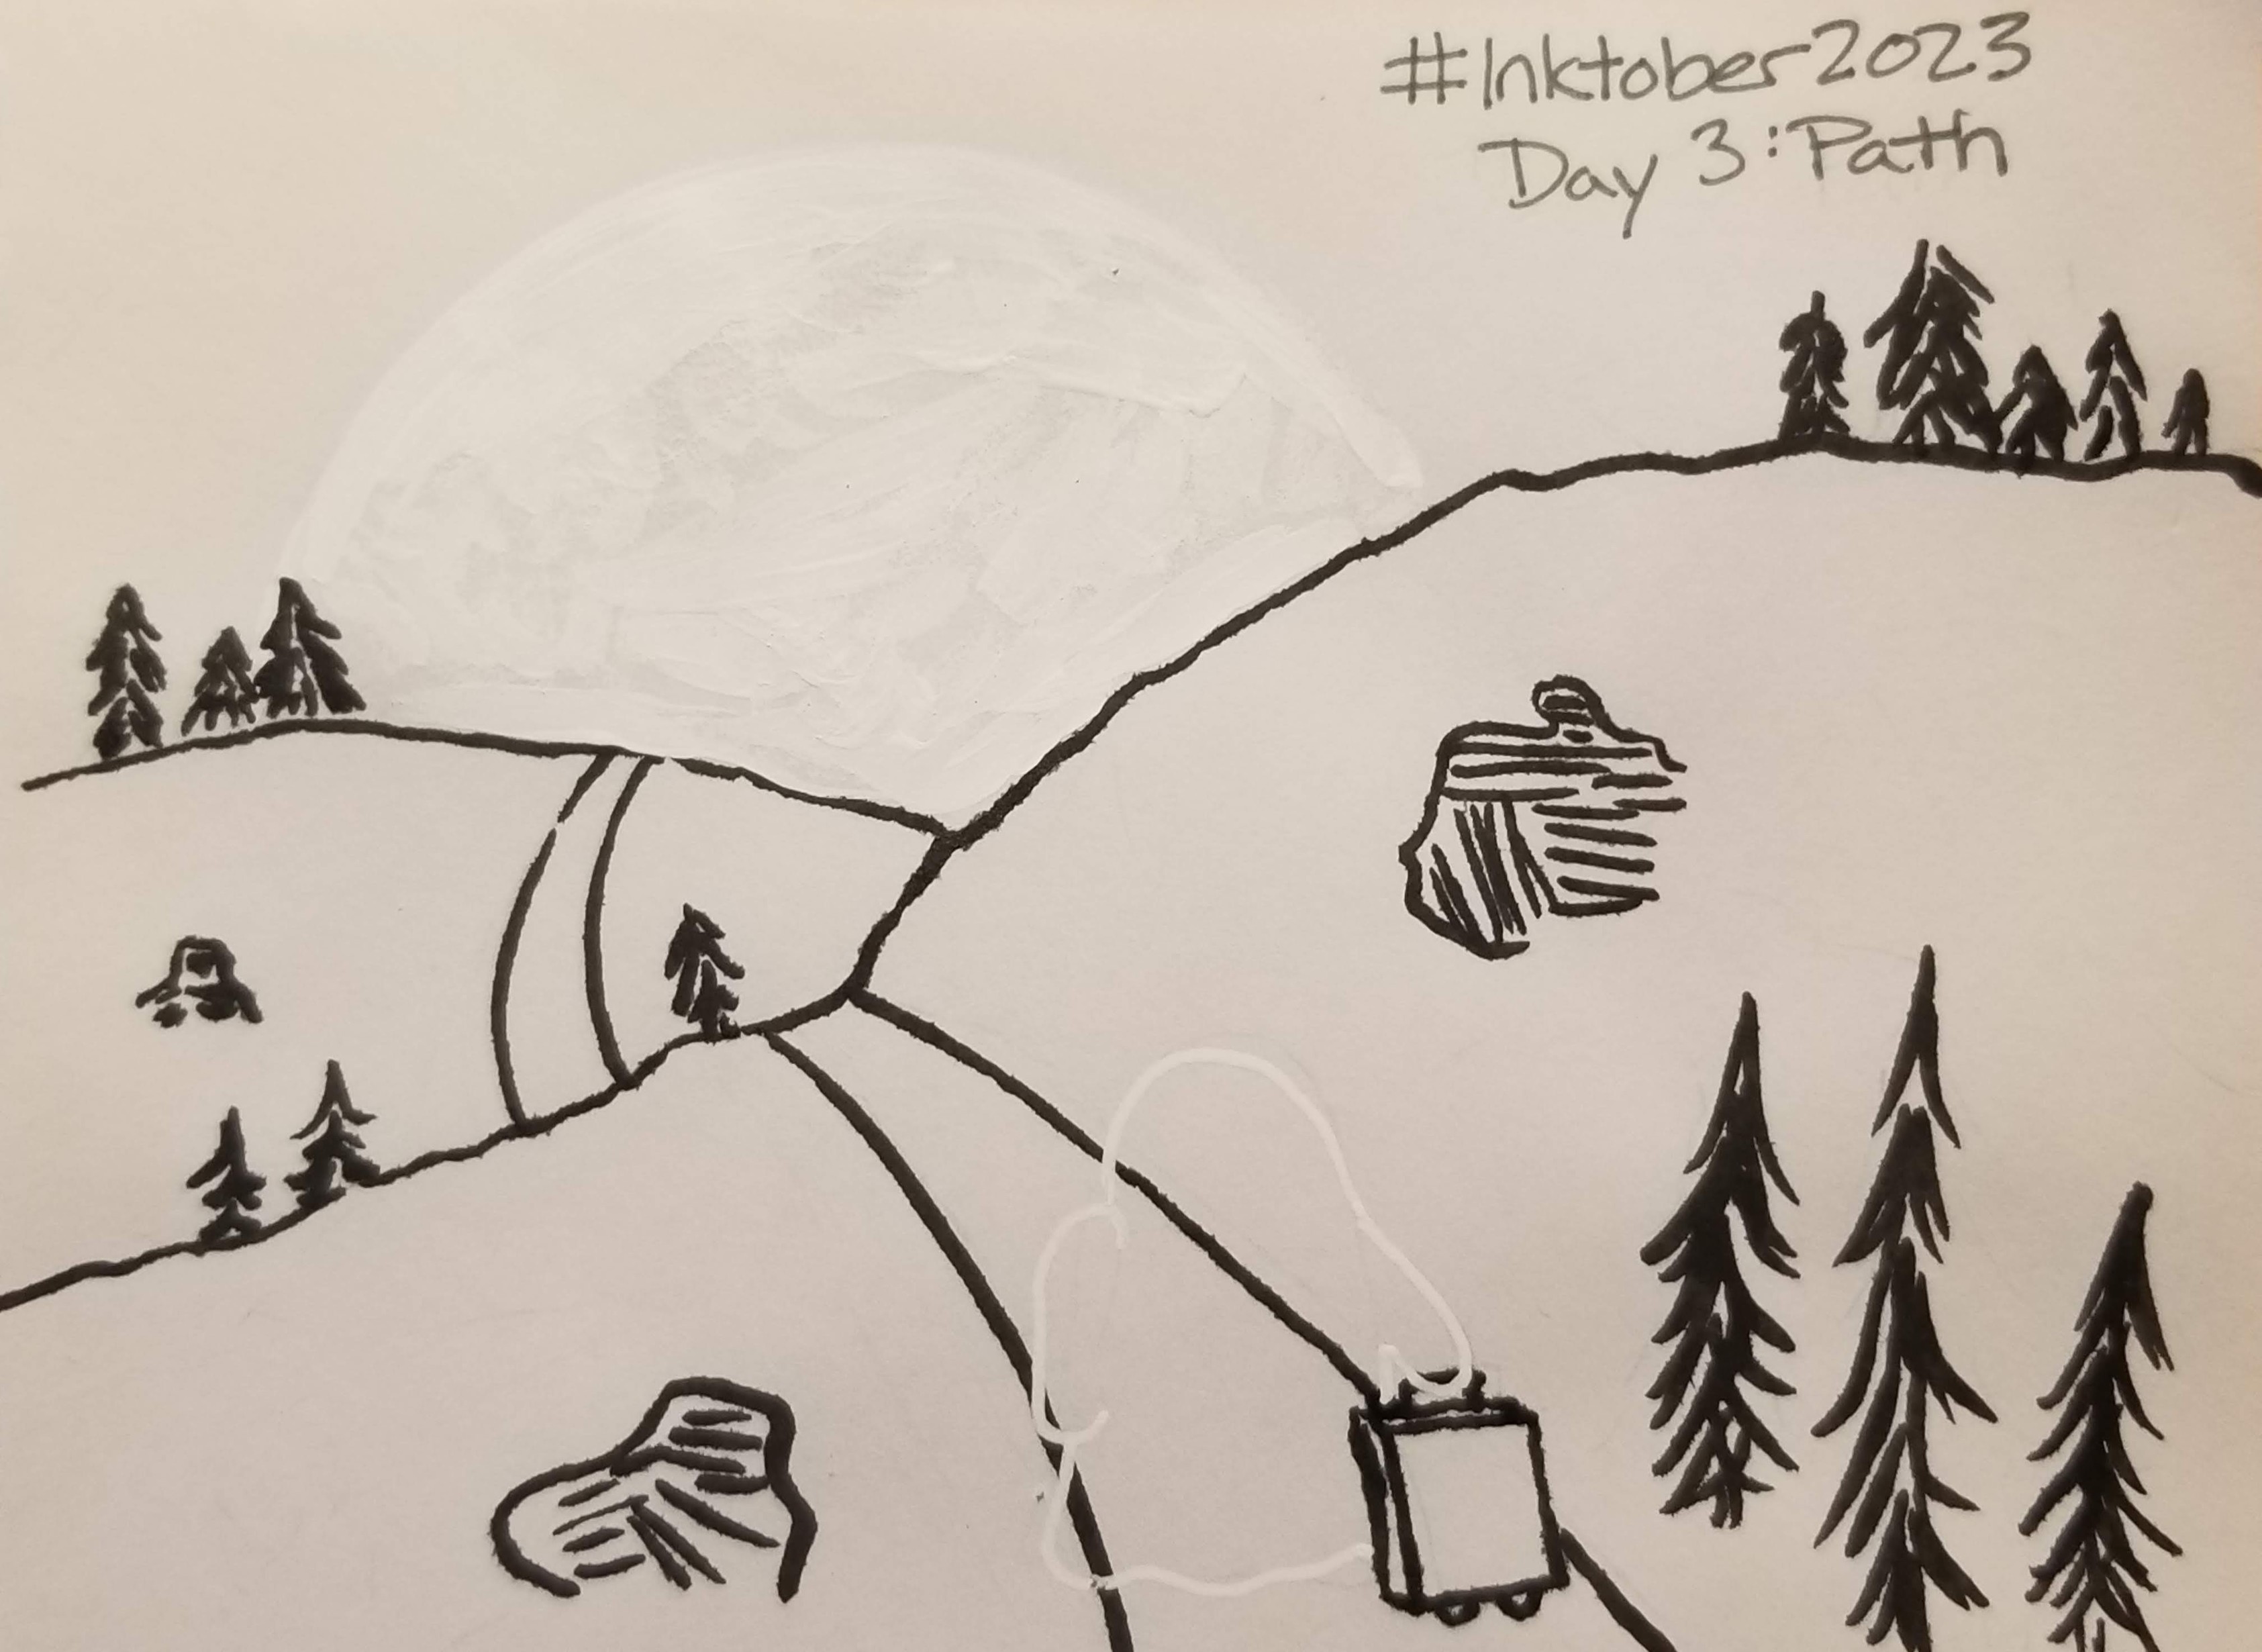 Ink drawing of a path winding over hills dotted with boulders & evergreen trees. A ghost is pulling a suitcase along the path, & the moon is setting in the distance.